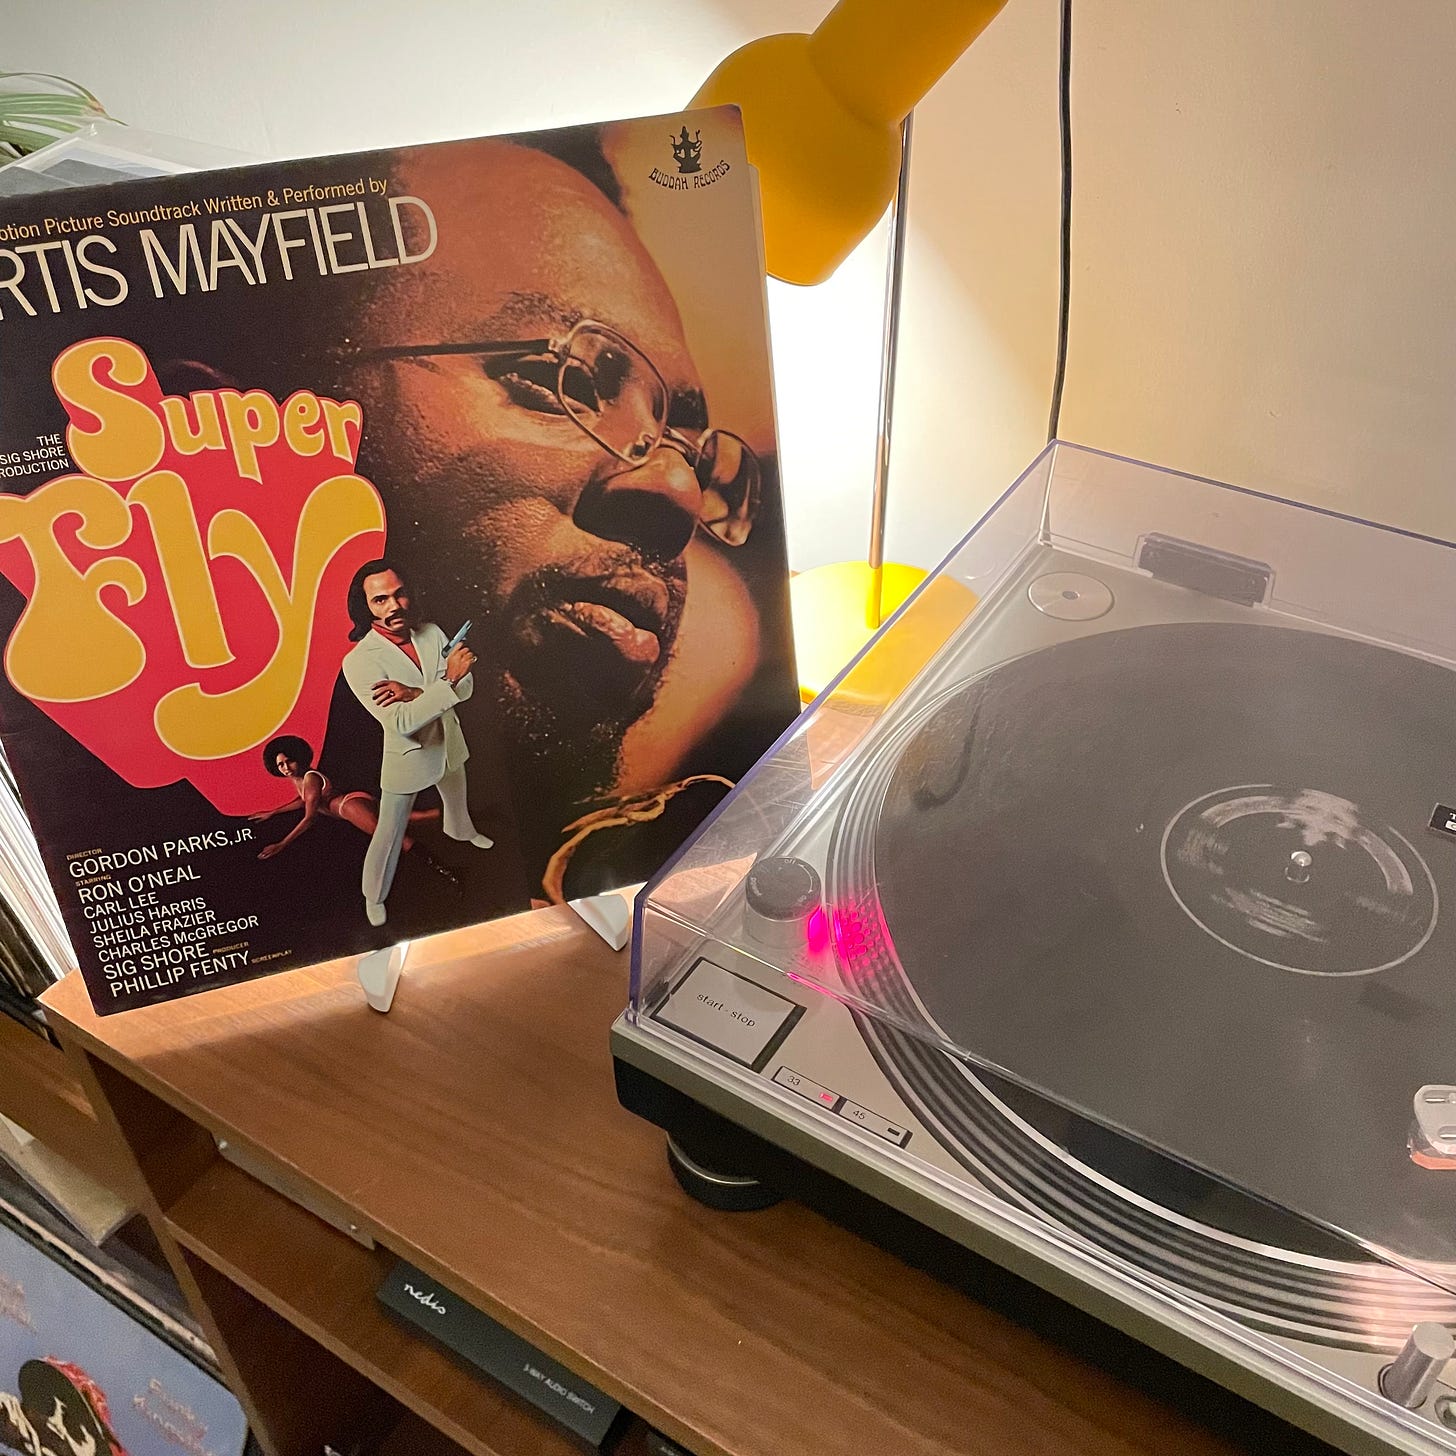 Back home, spinning my 52-year-old copy of Super Fly. Sounds lush